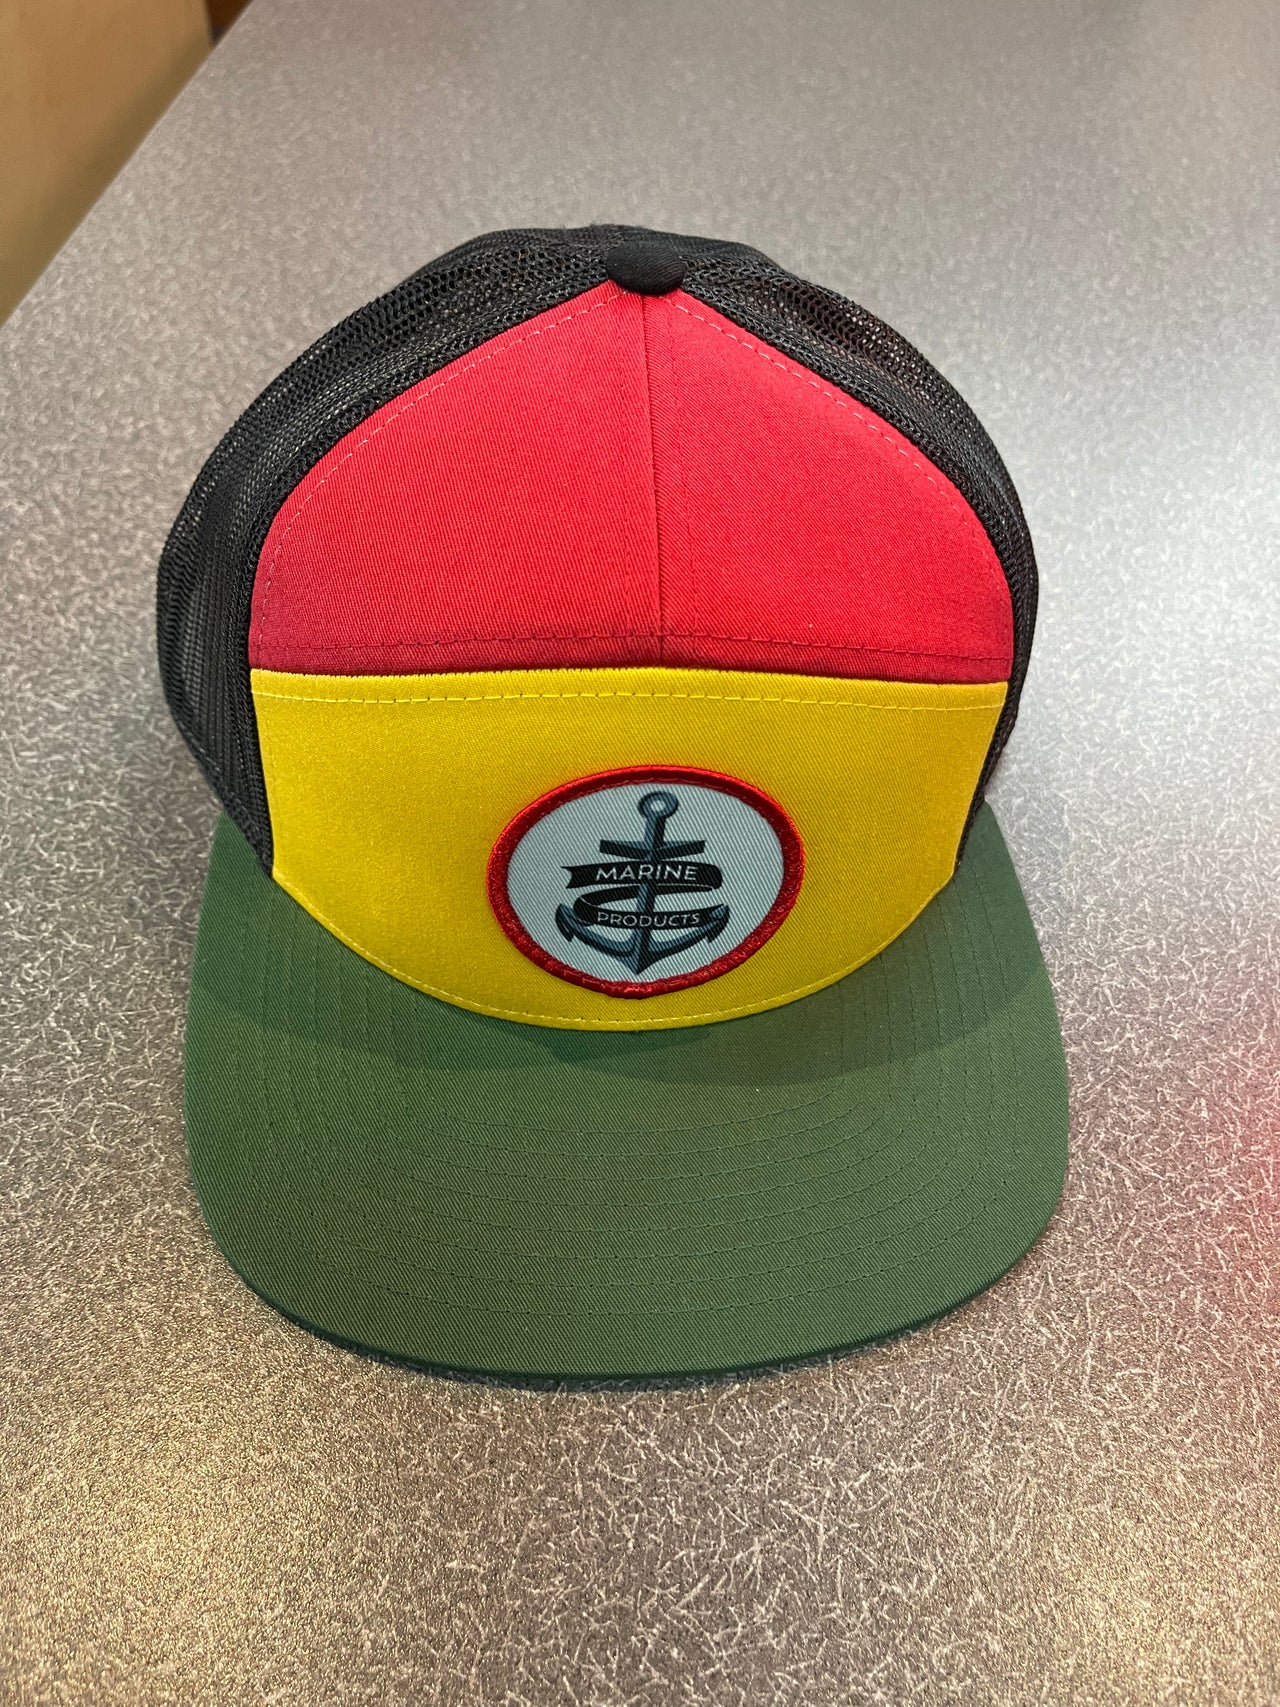 Marine Products Yellow/Red/Black Green 3 Panel Hat w/ Anchor Patch